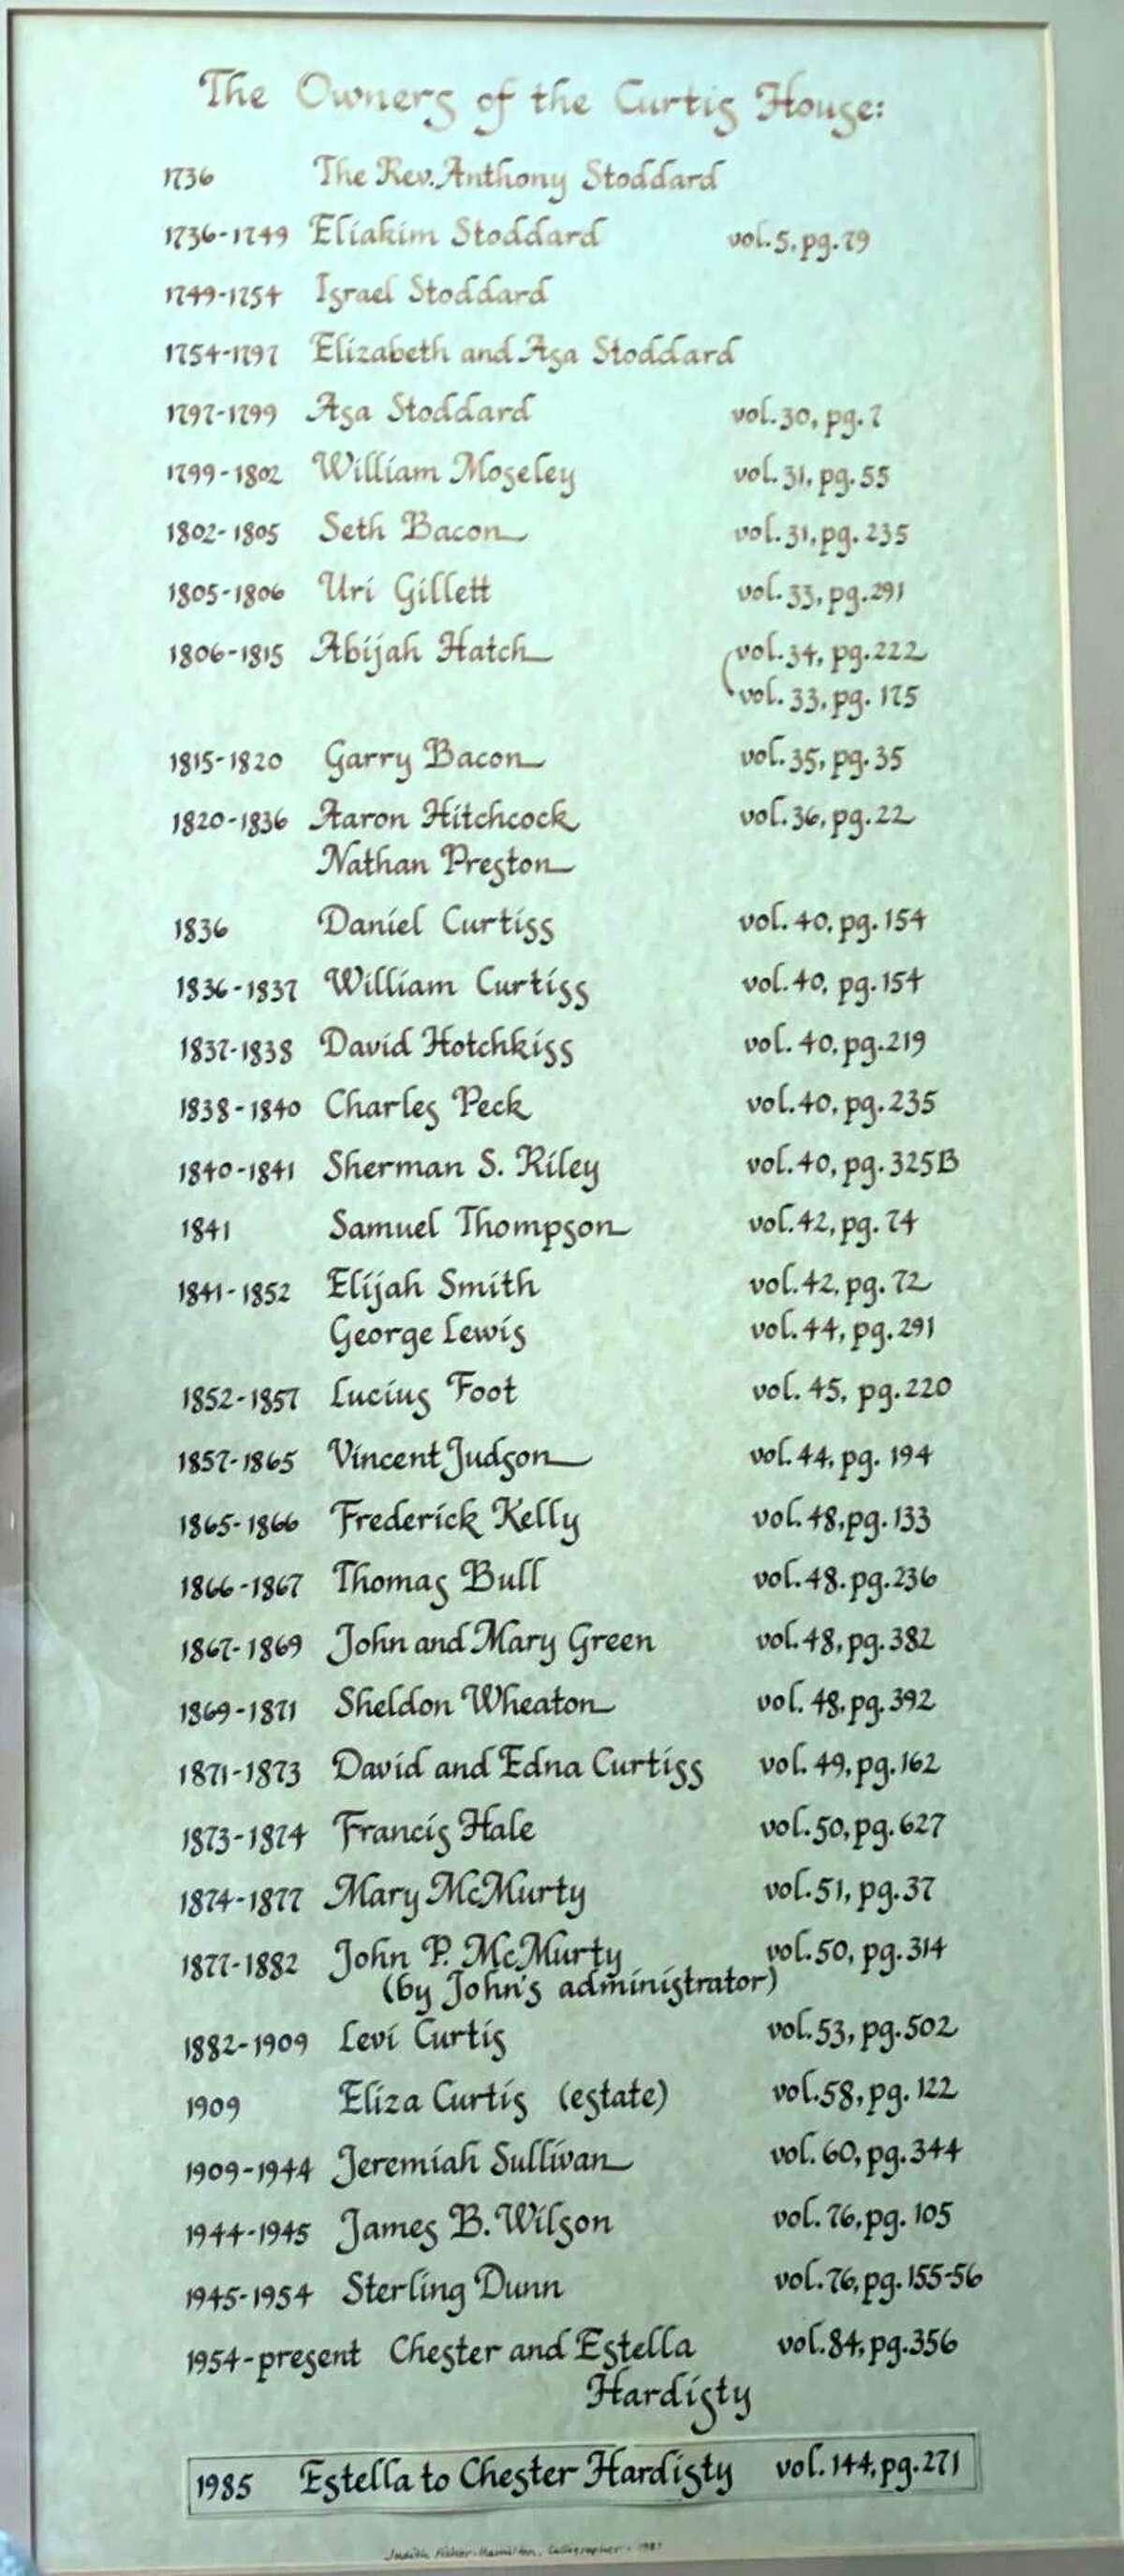 A list of the many owners of 1754 House over the years.